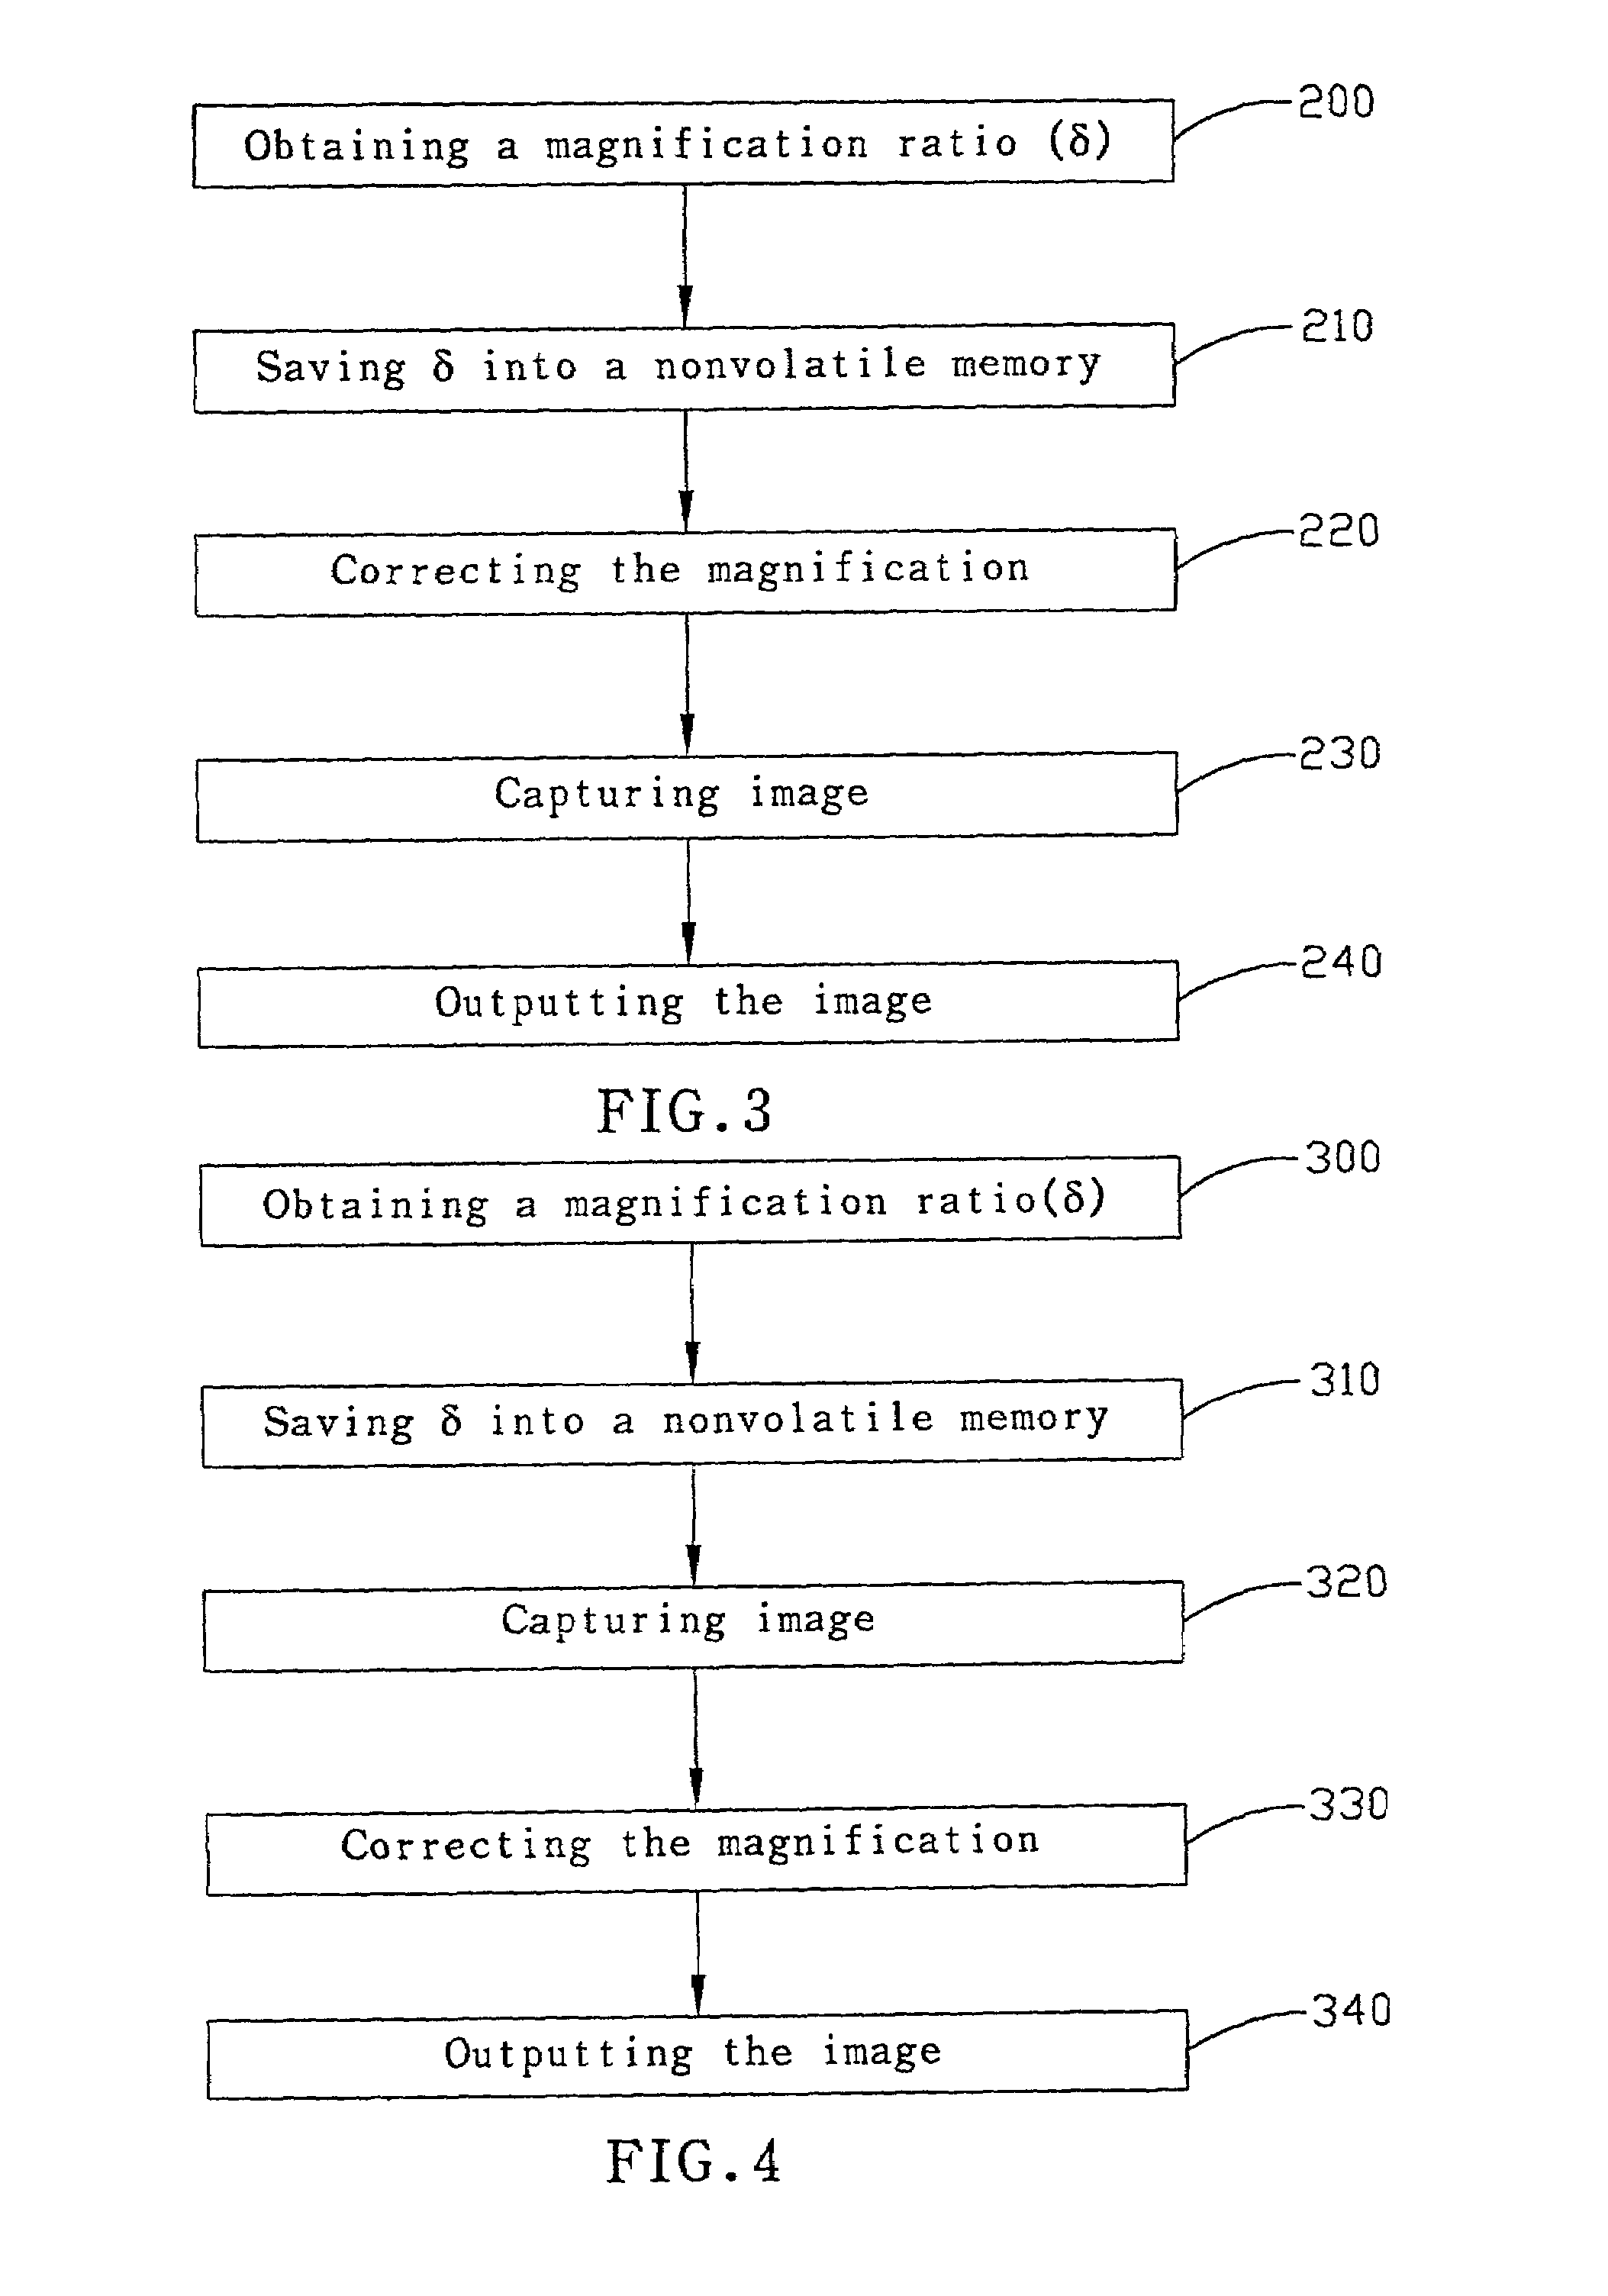 Method for correcting magnification